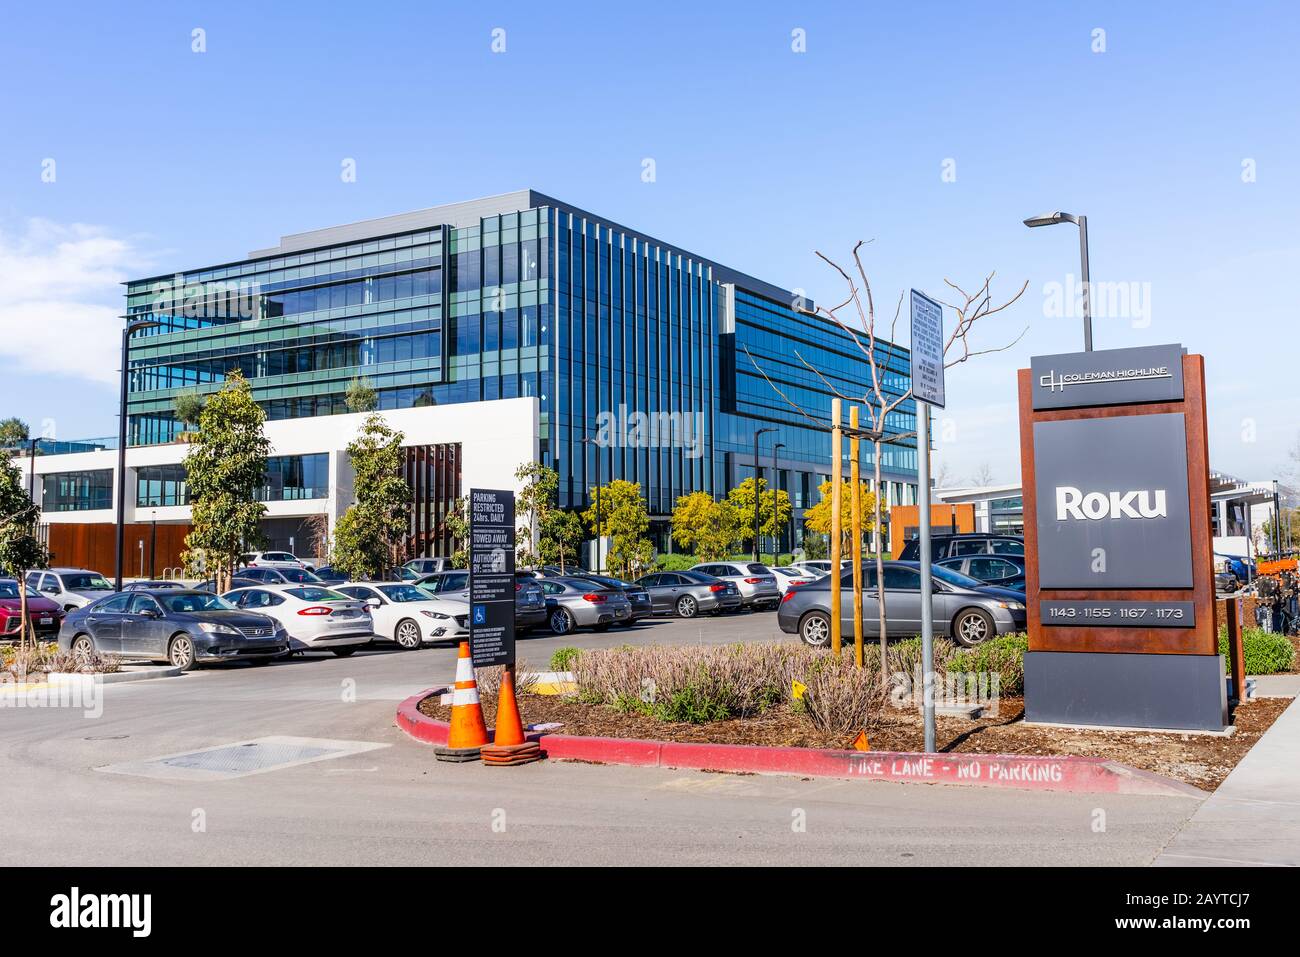 Feb 12, 2020 San Jose / CA / USA - Roku headquarters in Silicon Valley; Roku  Inc manufactures a variety of digital media players that allow access to  Stock Photo - Alamy